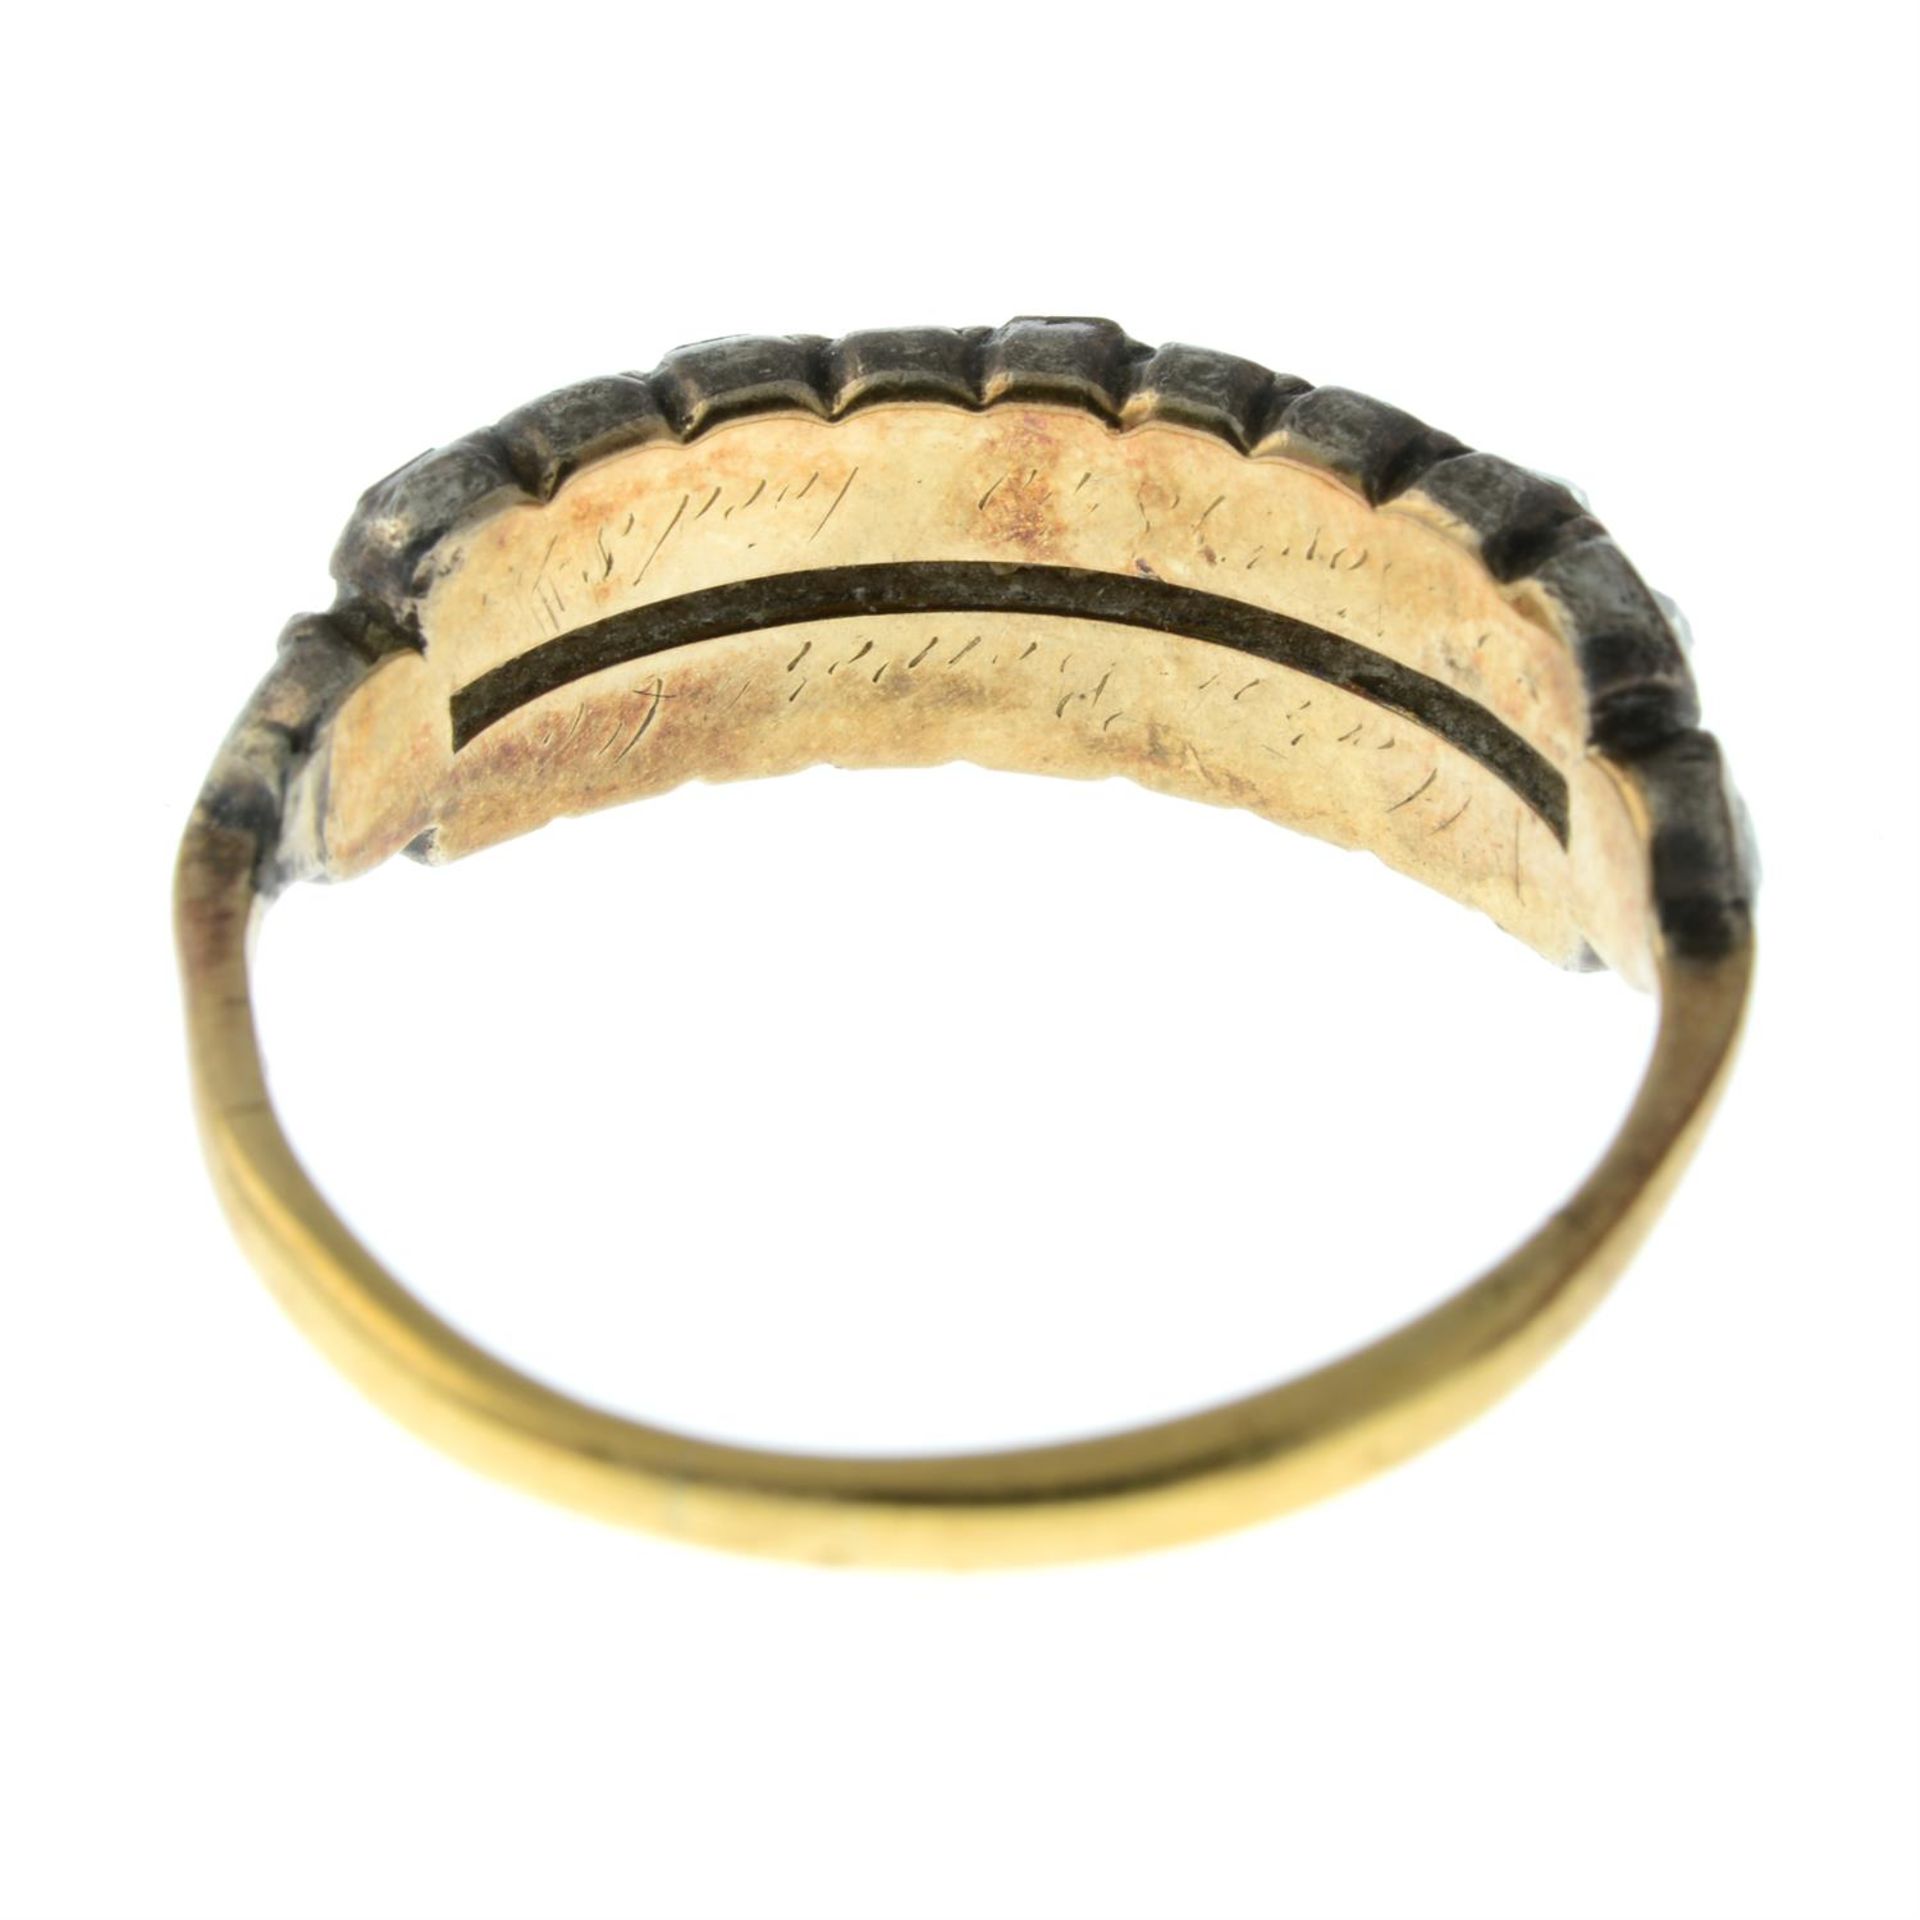 A late Georgian/early 19th century silver and gold old-cut diamond two-row ring. - Image 4 of 5